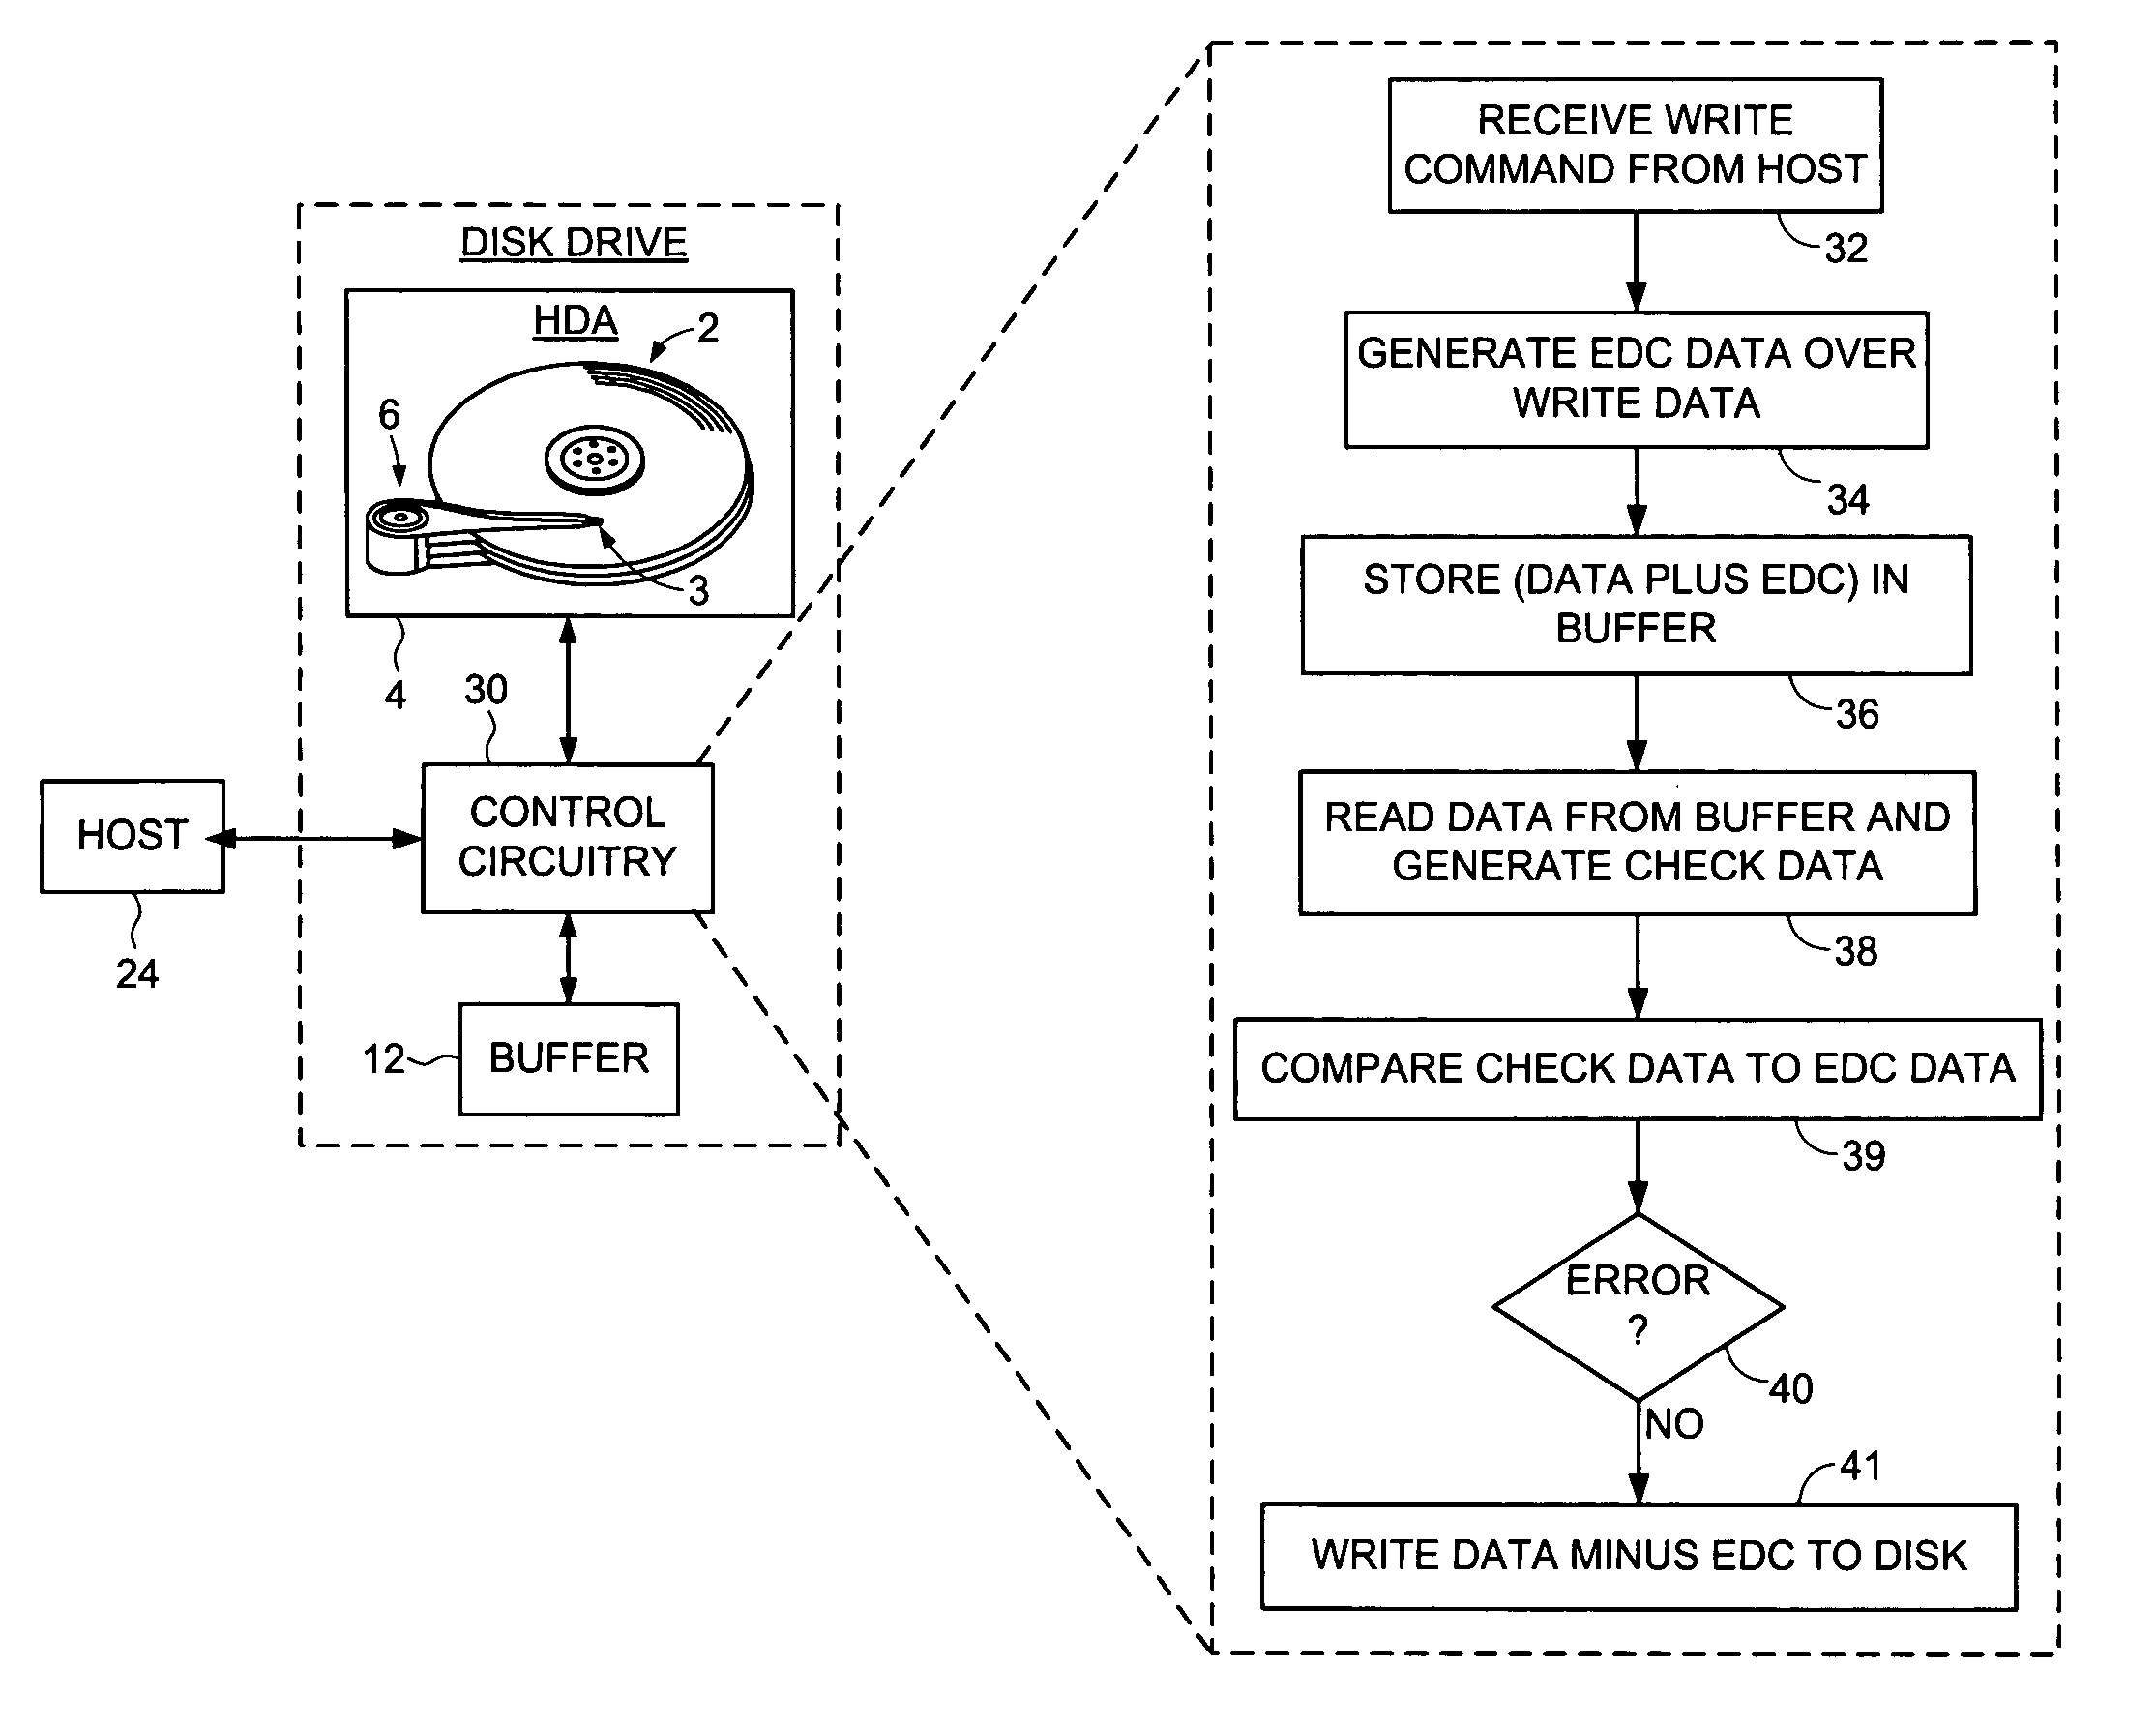 Disk drive implementing data path protection without writing the error detection code data to the disk